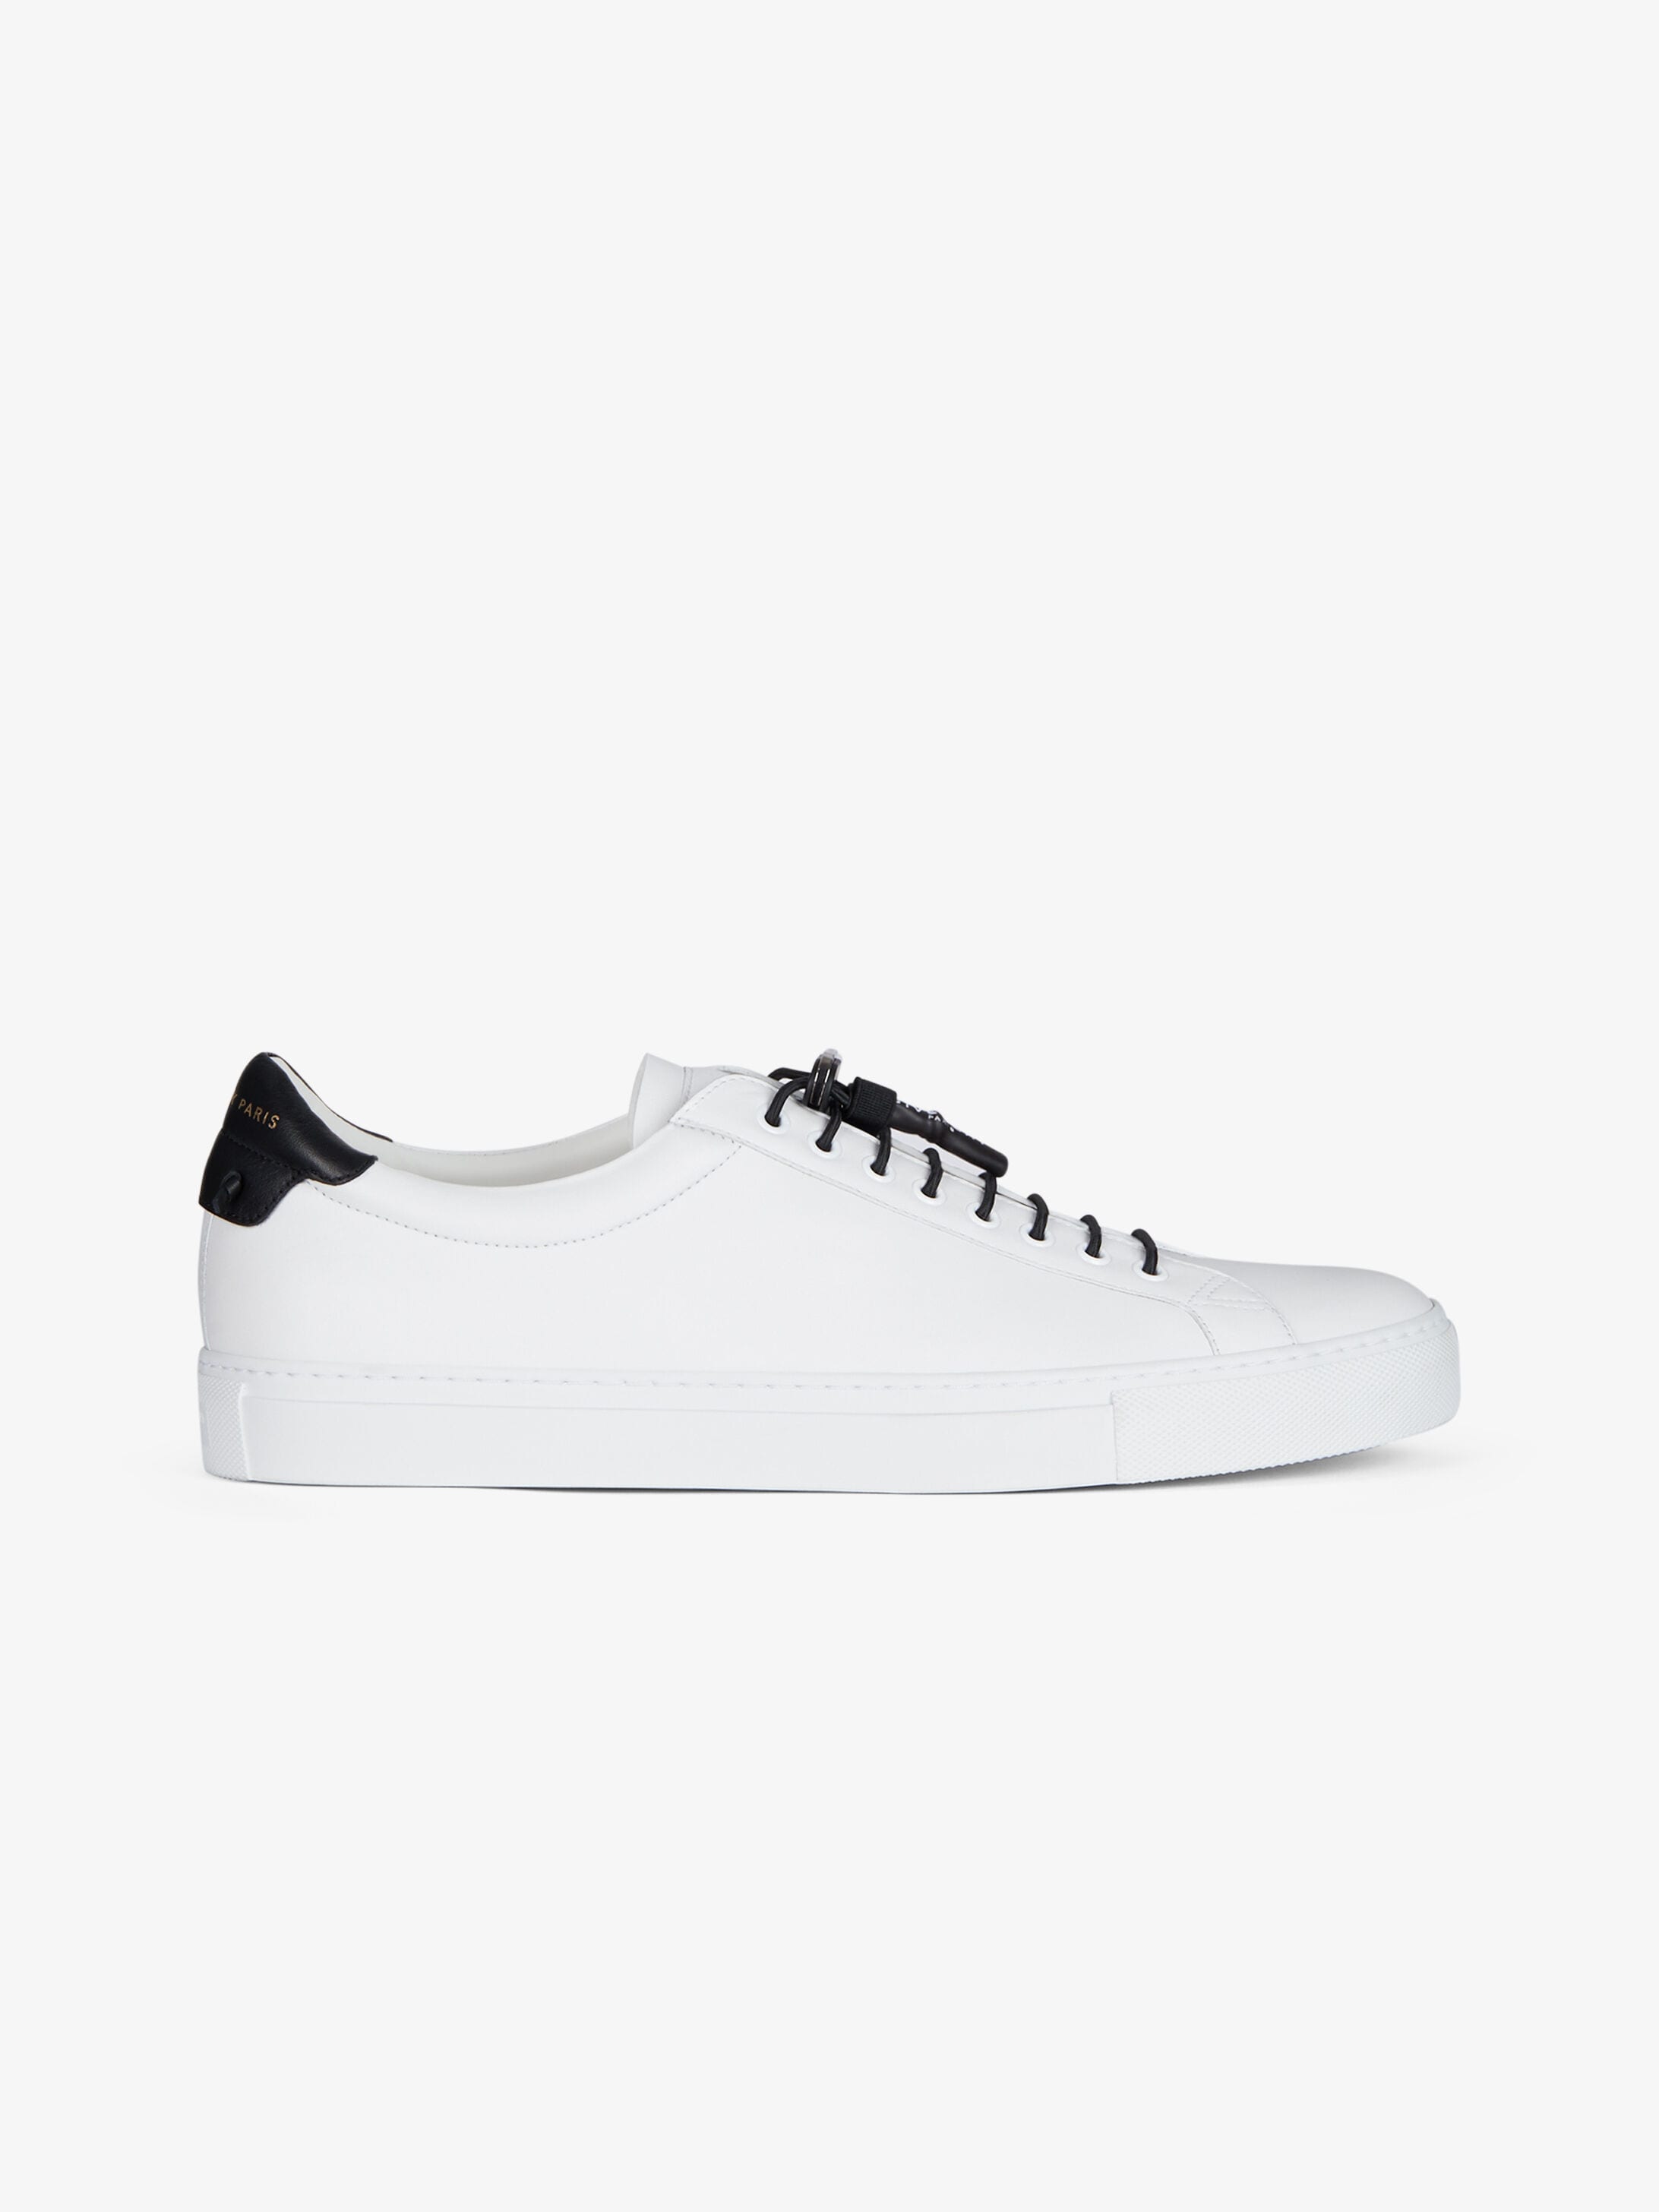 givenchy shoes online